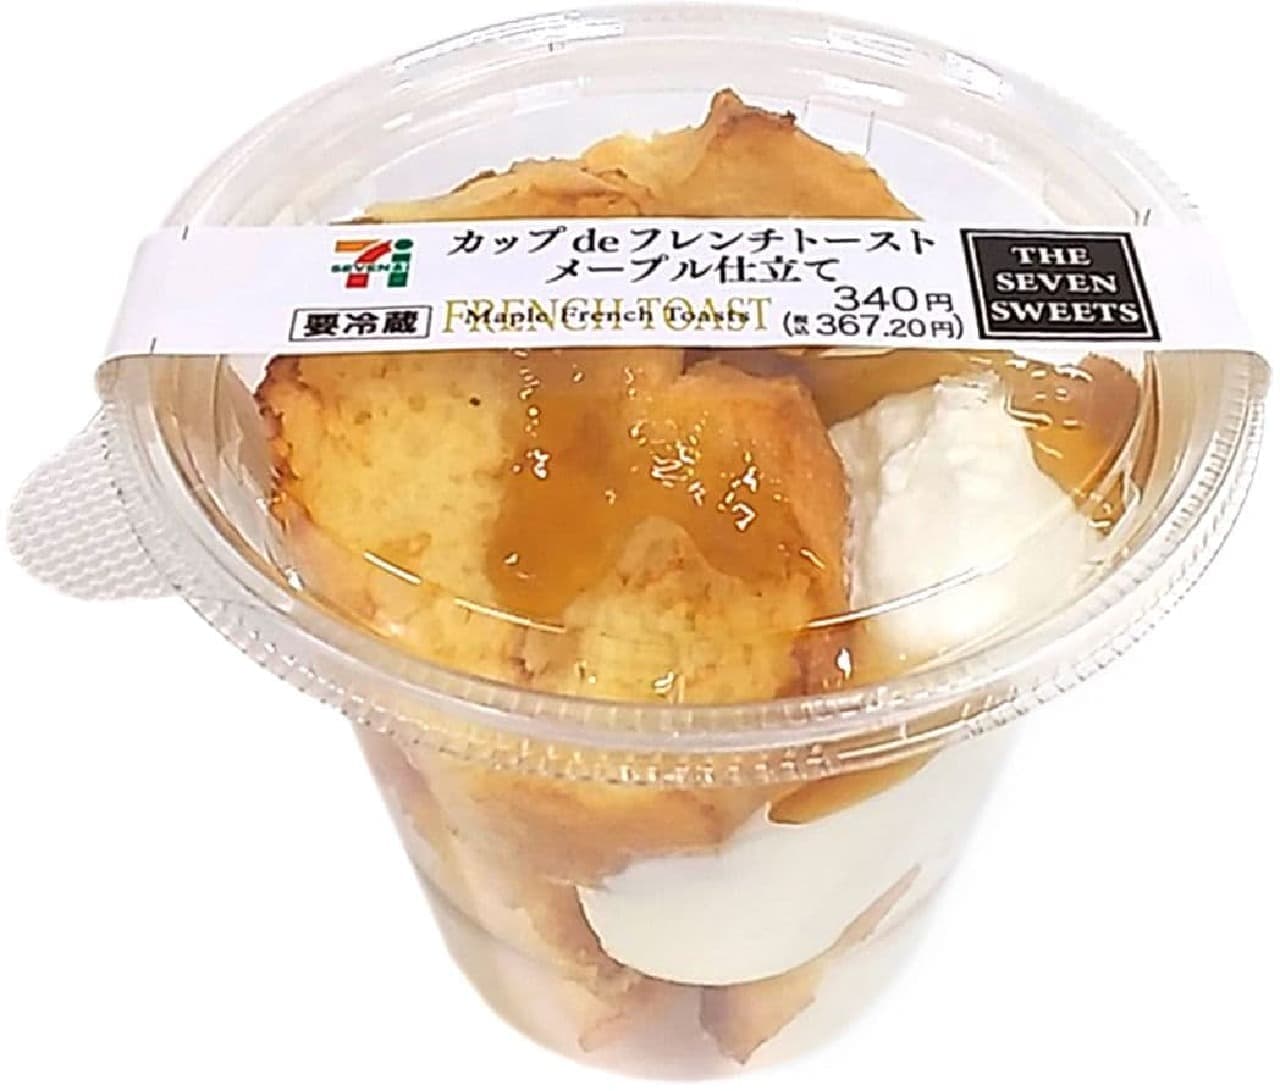 7-Eleven "Cup de French Toast Maple Tailored"